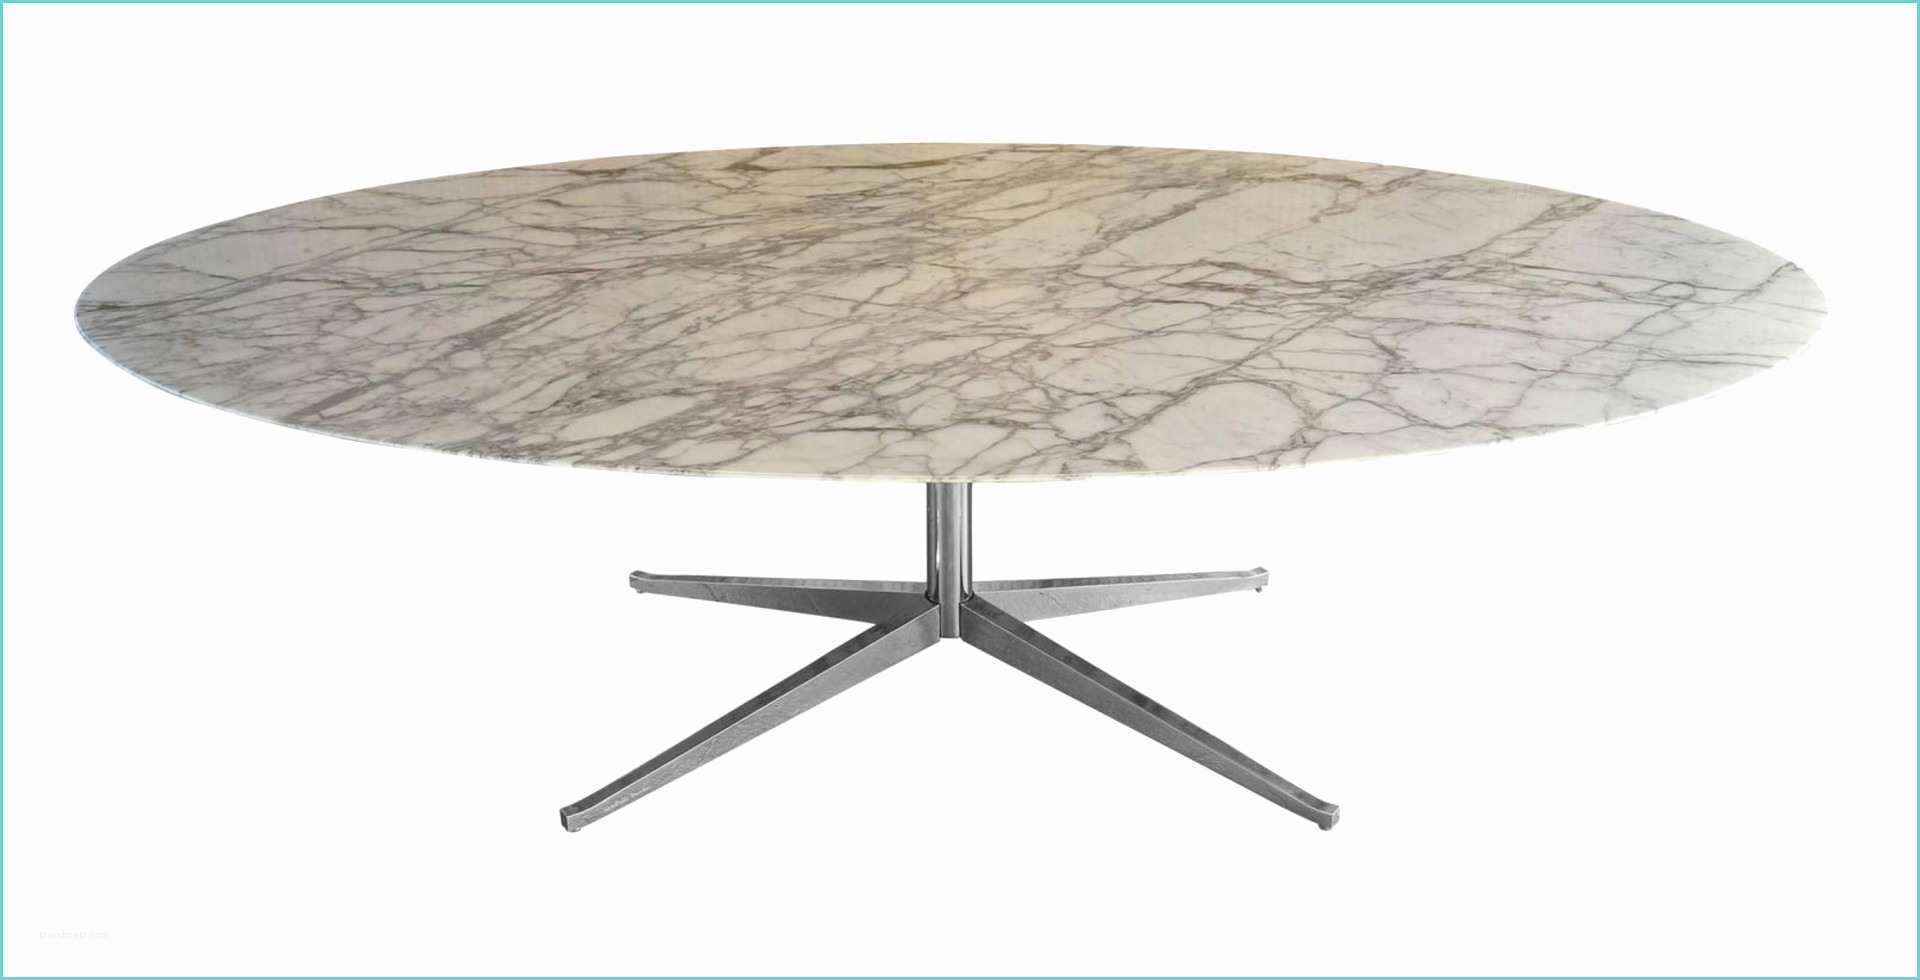 Table Knoll Ovale Marbre Table Knoll Ovale Occasion Perfect Table Knoll Ovale